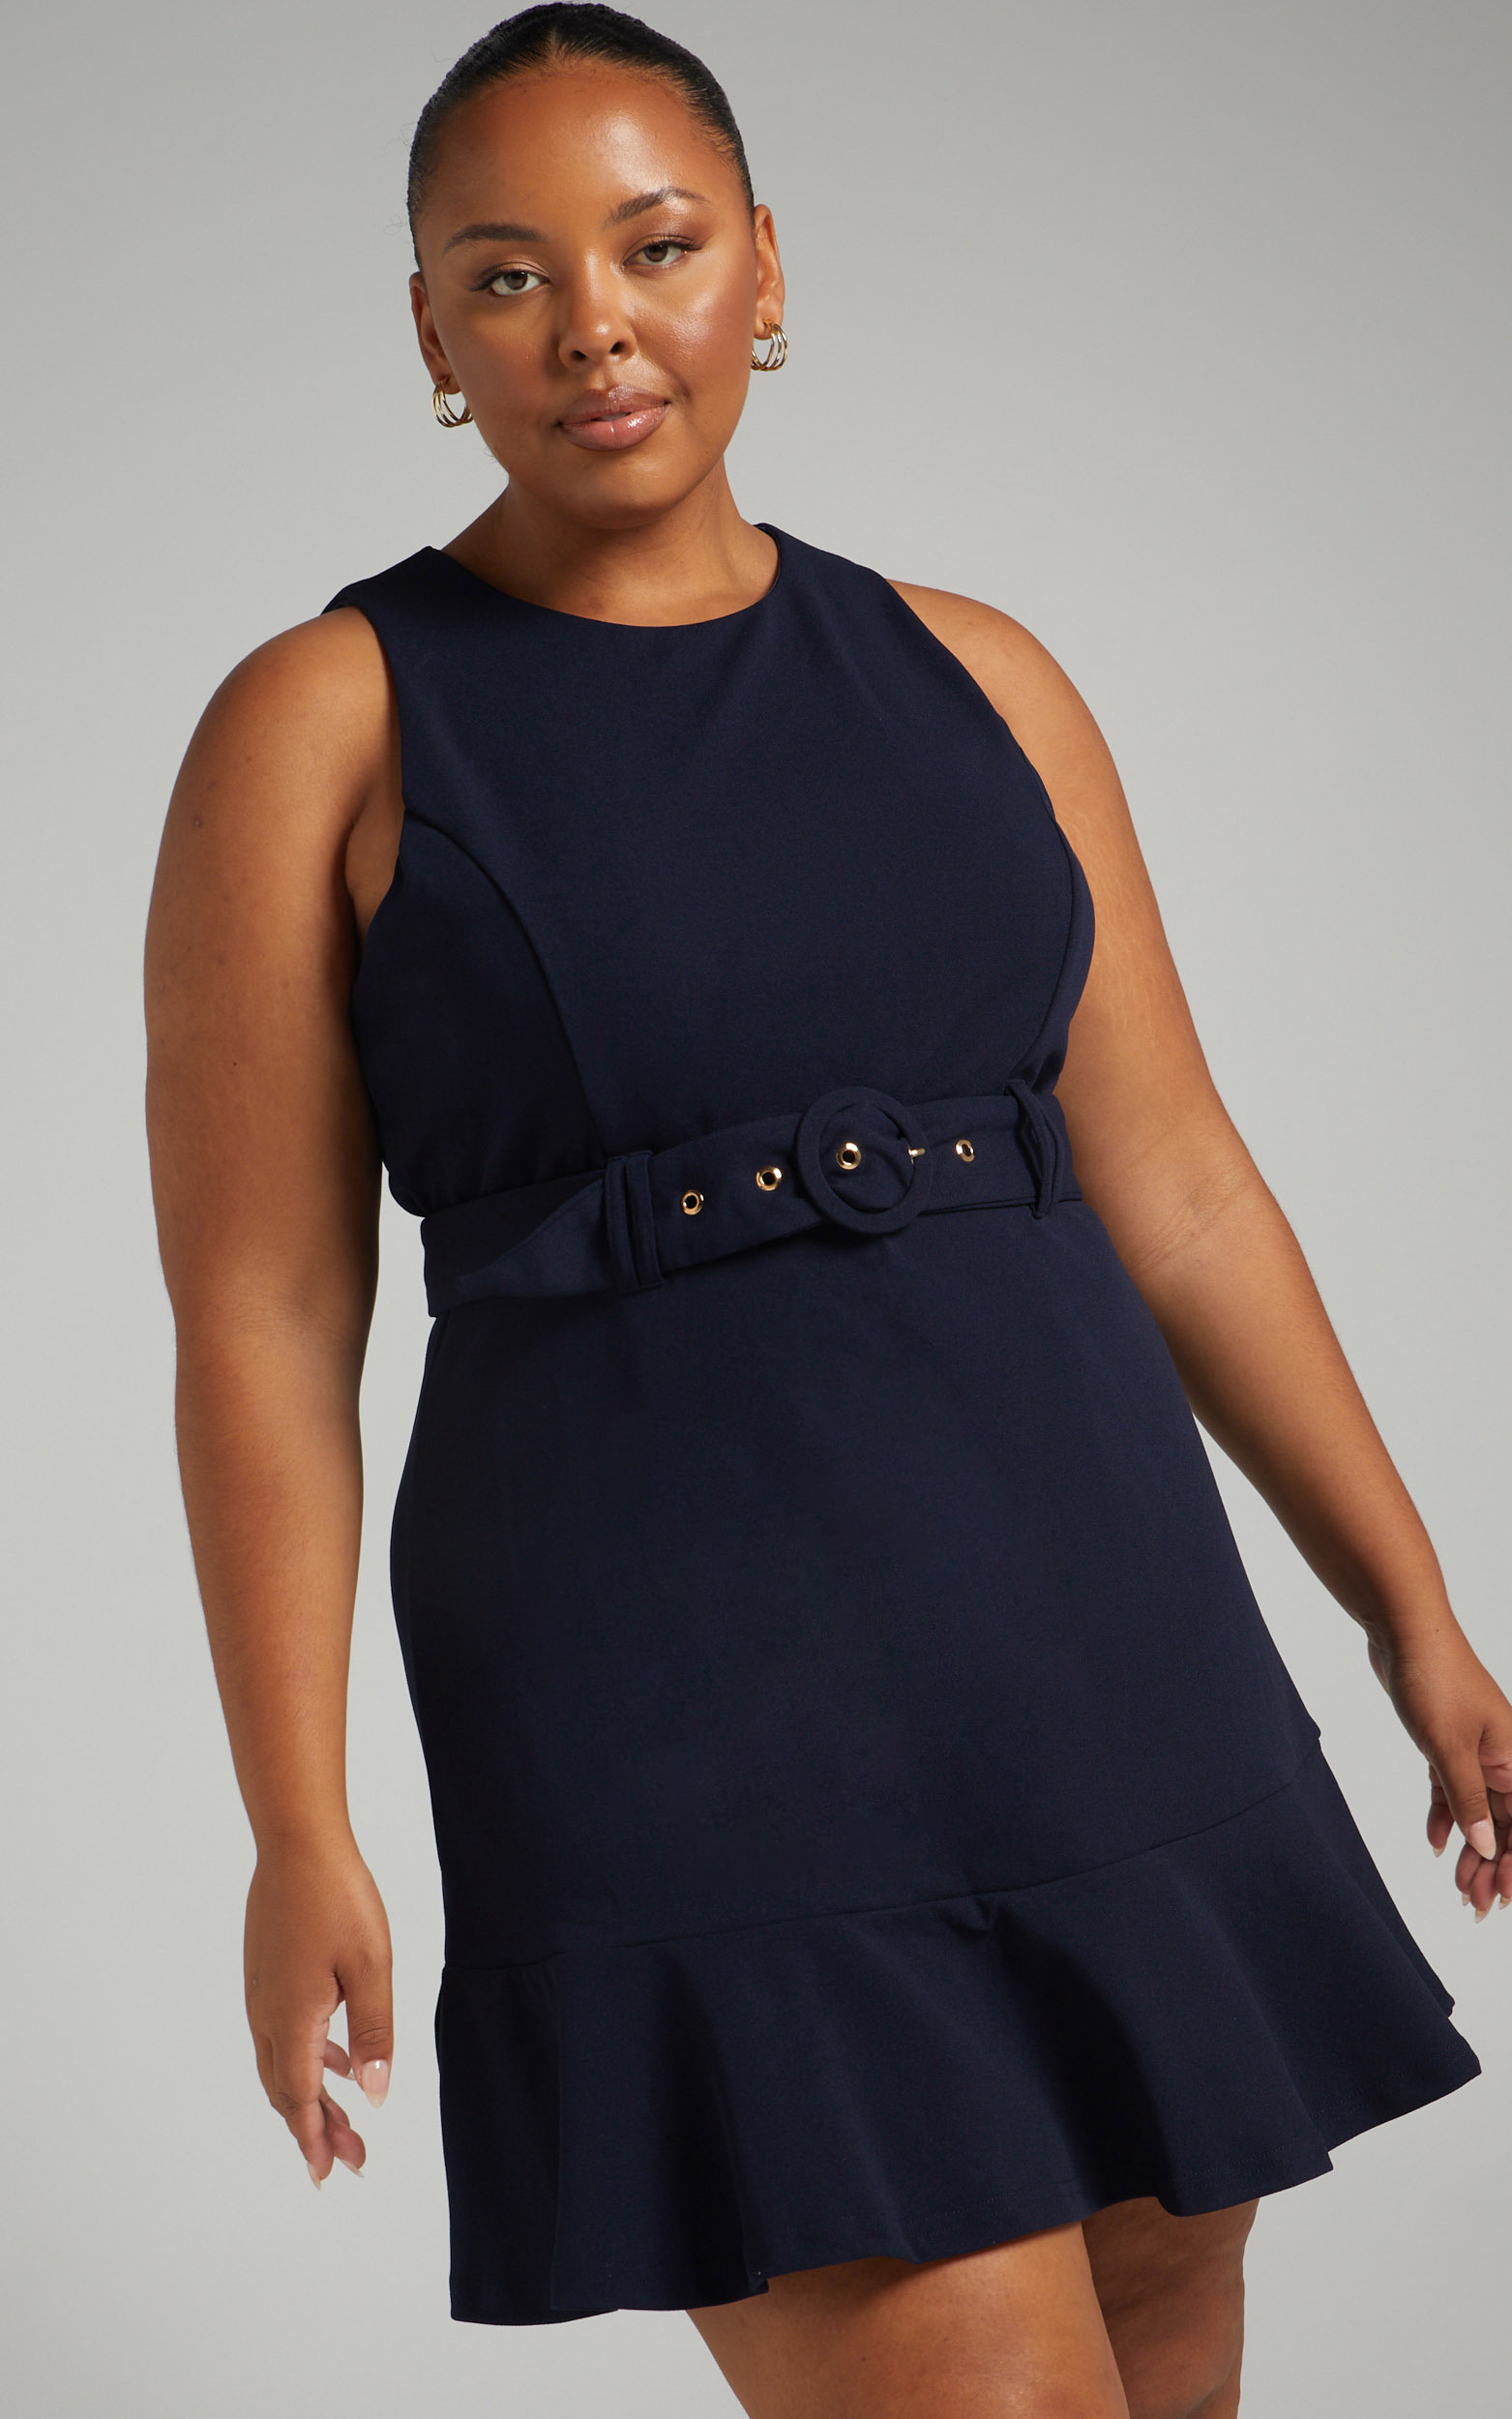 Kielle Sleeveless Mini Dress with Belt in Navy - 04, NVY1, hi-res image number null